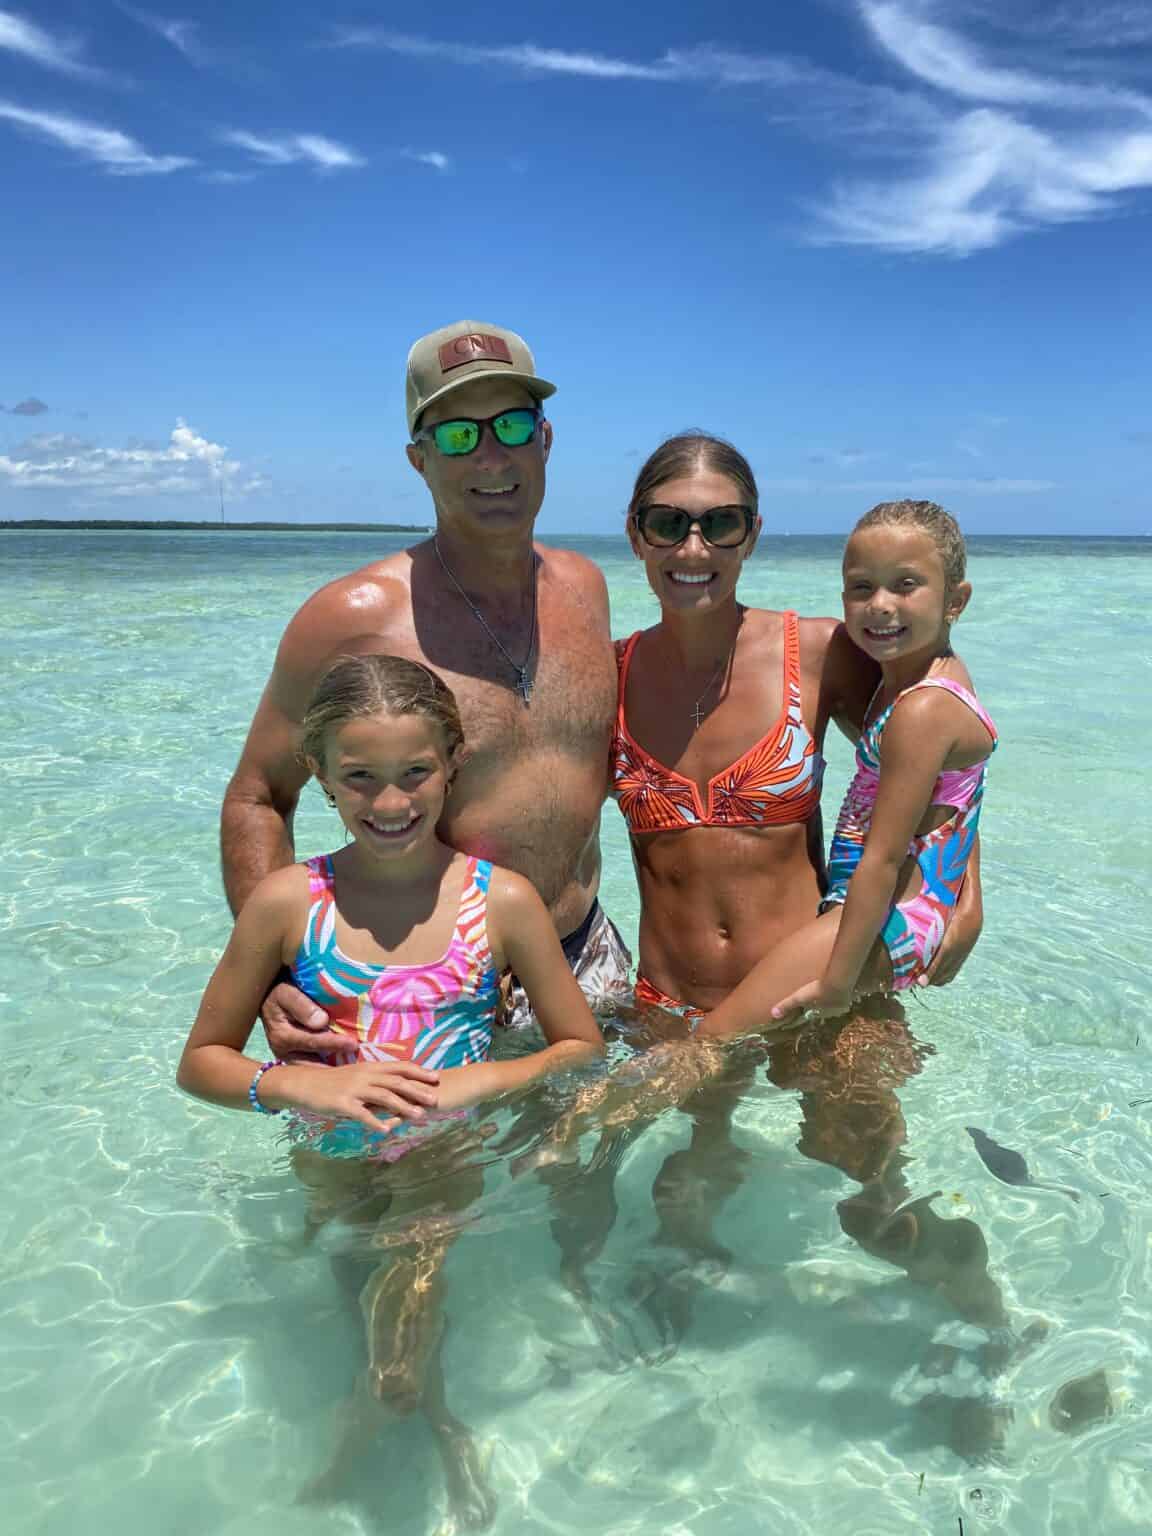 Family of four enjoying a sunny day in clear shallow water at a beach, smiling at the camera. two adults and two kids, all in swimwear.